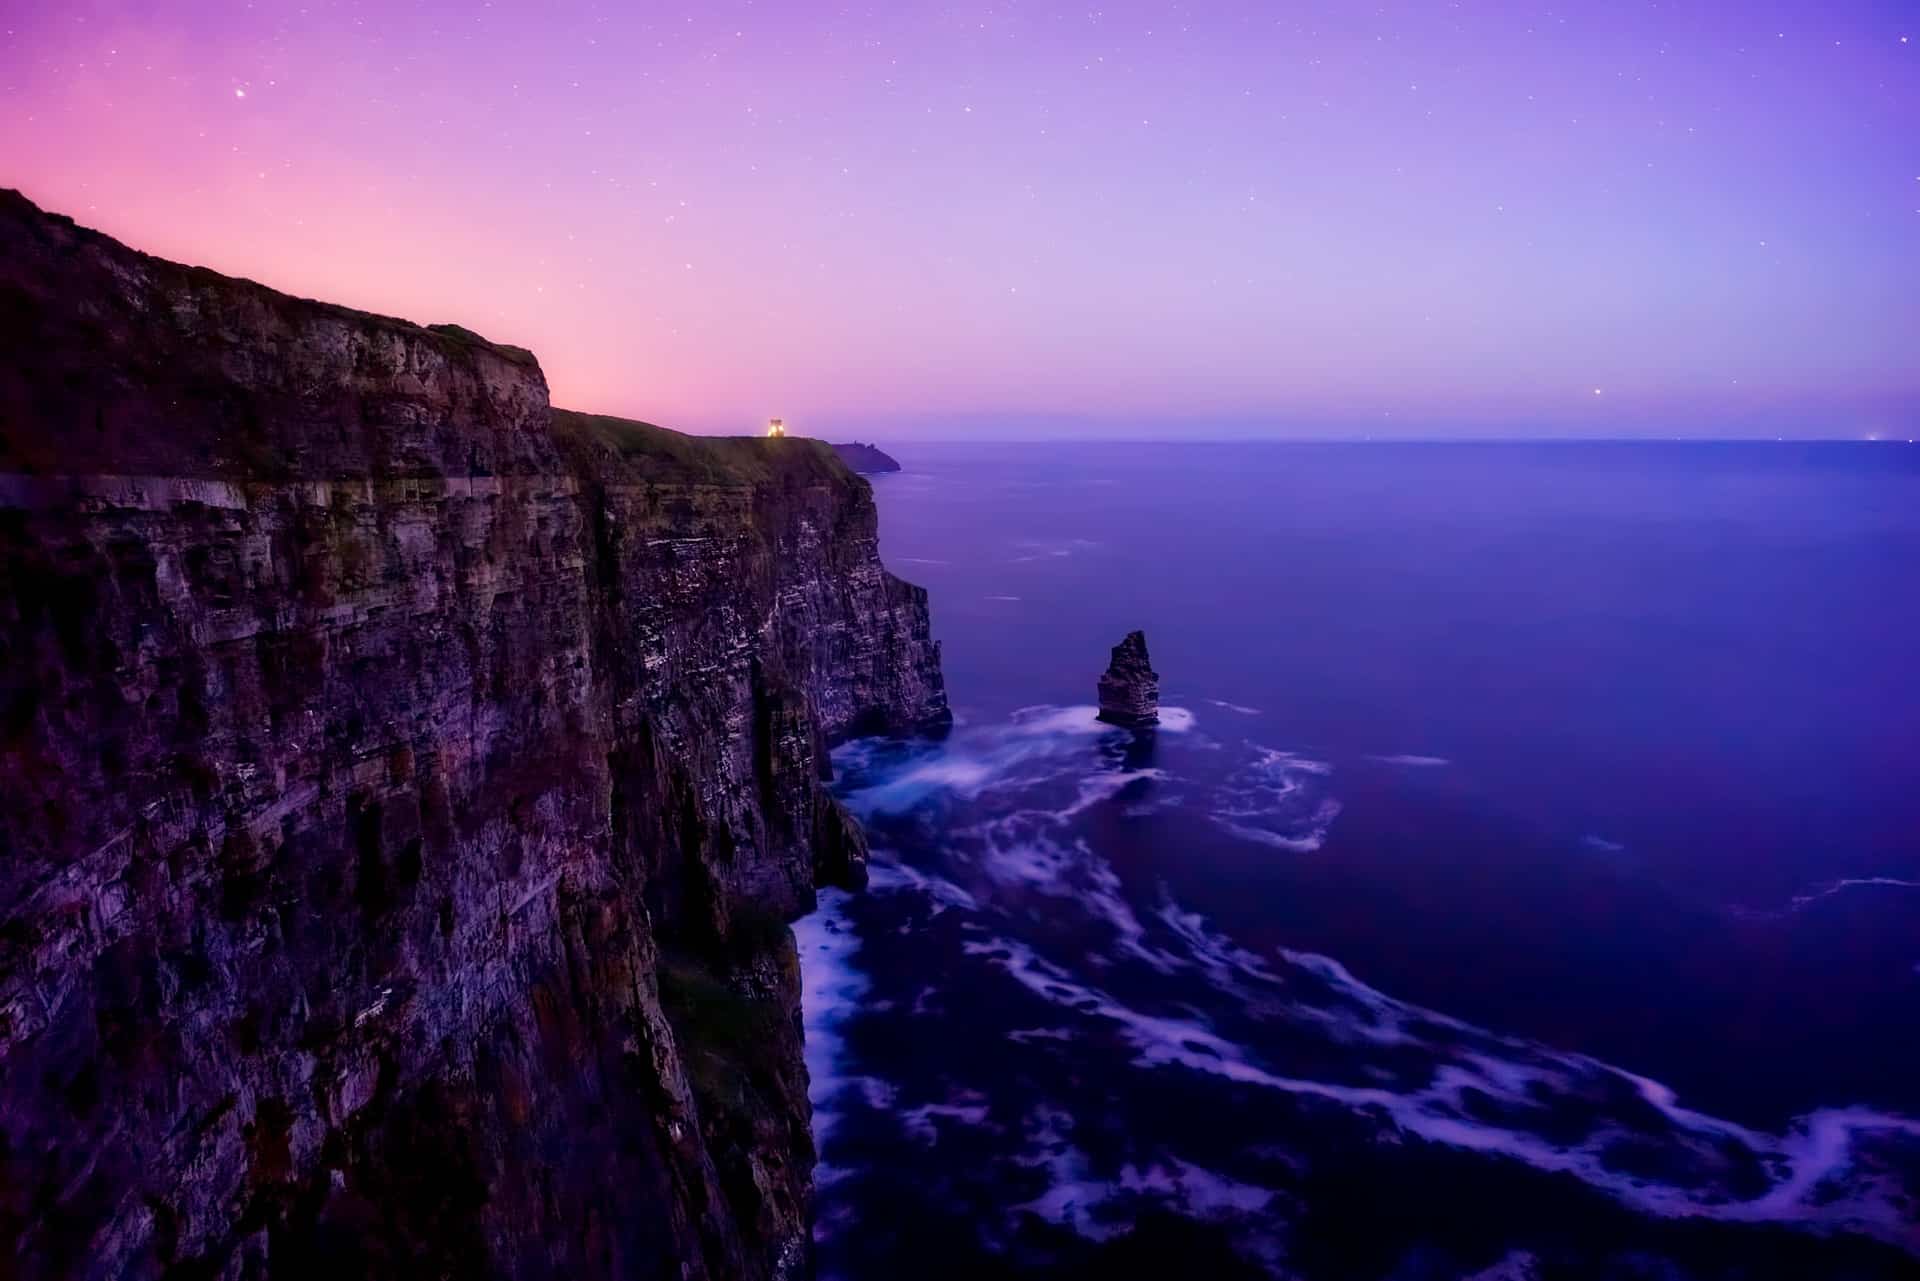 Essential guide to the Cliffs of Moher in Ireland